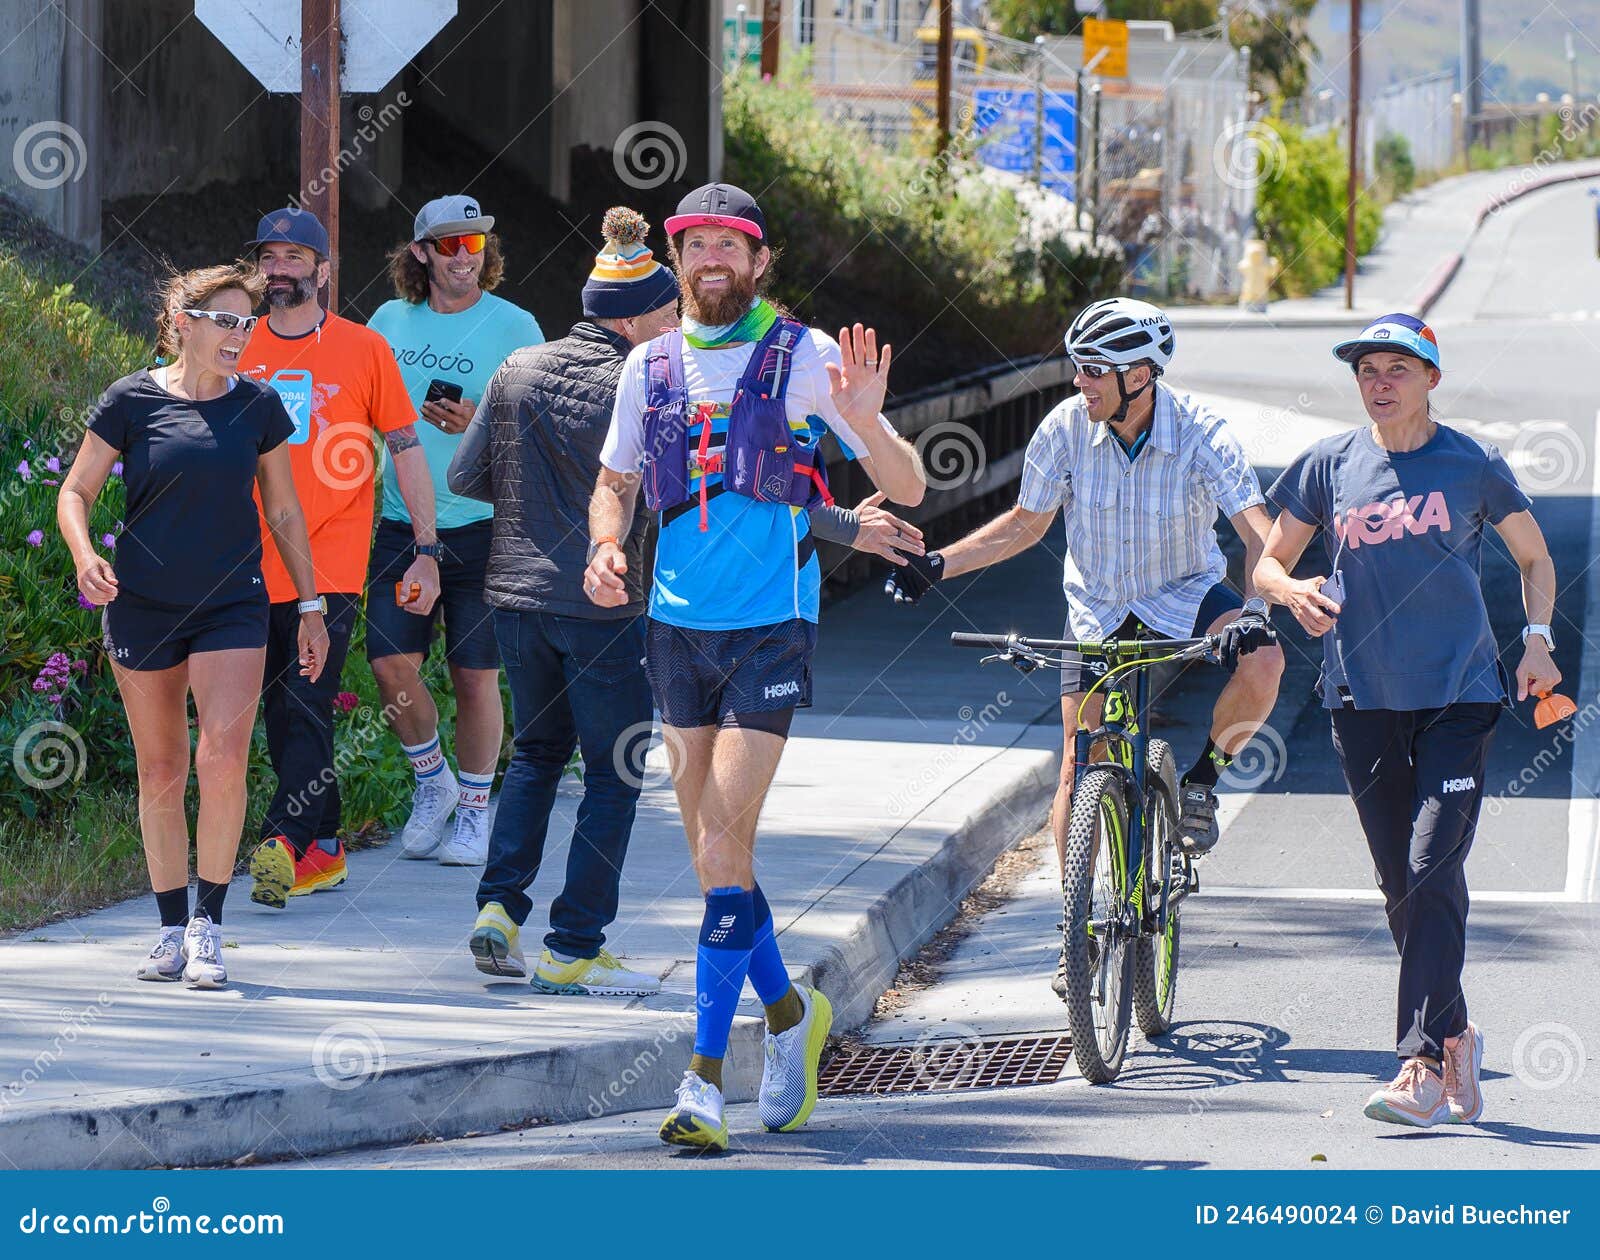 Mike Wardian Starts Run Across America Day 1 May 1 2022 At The Western